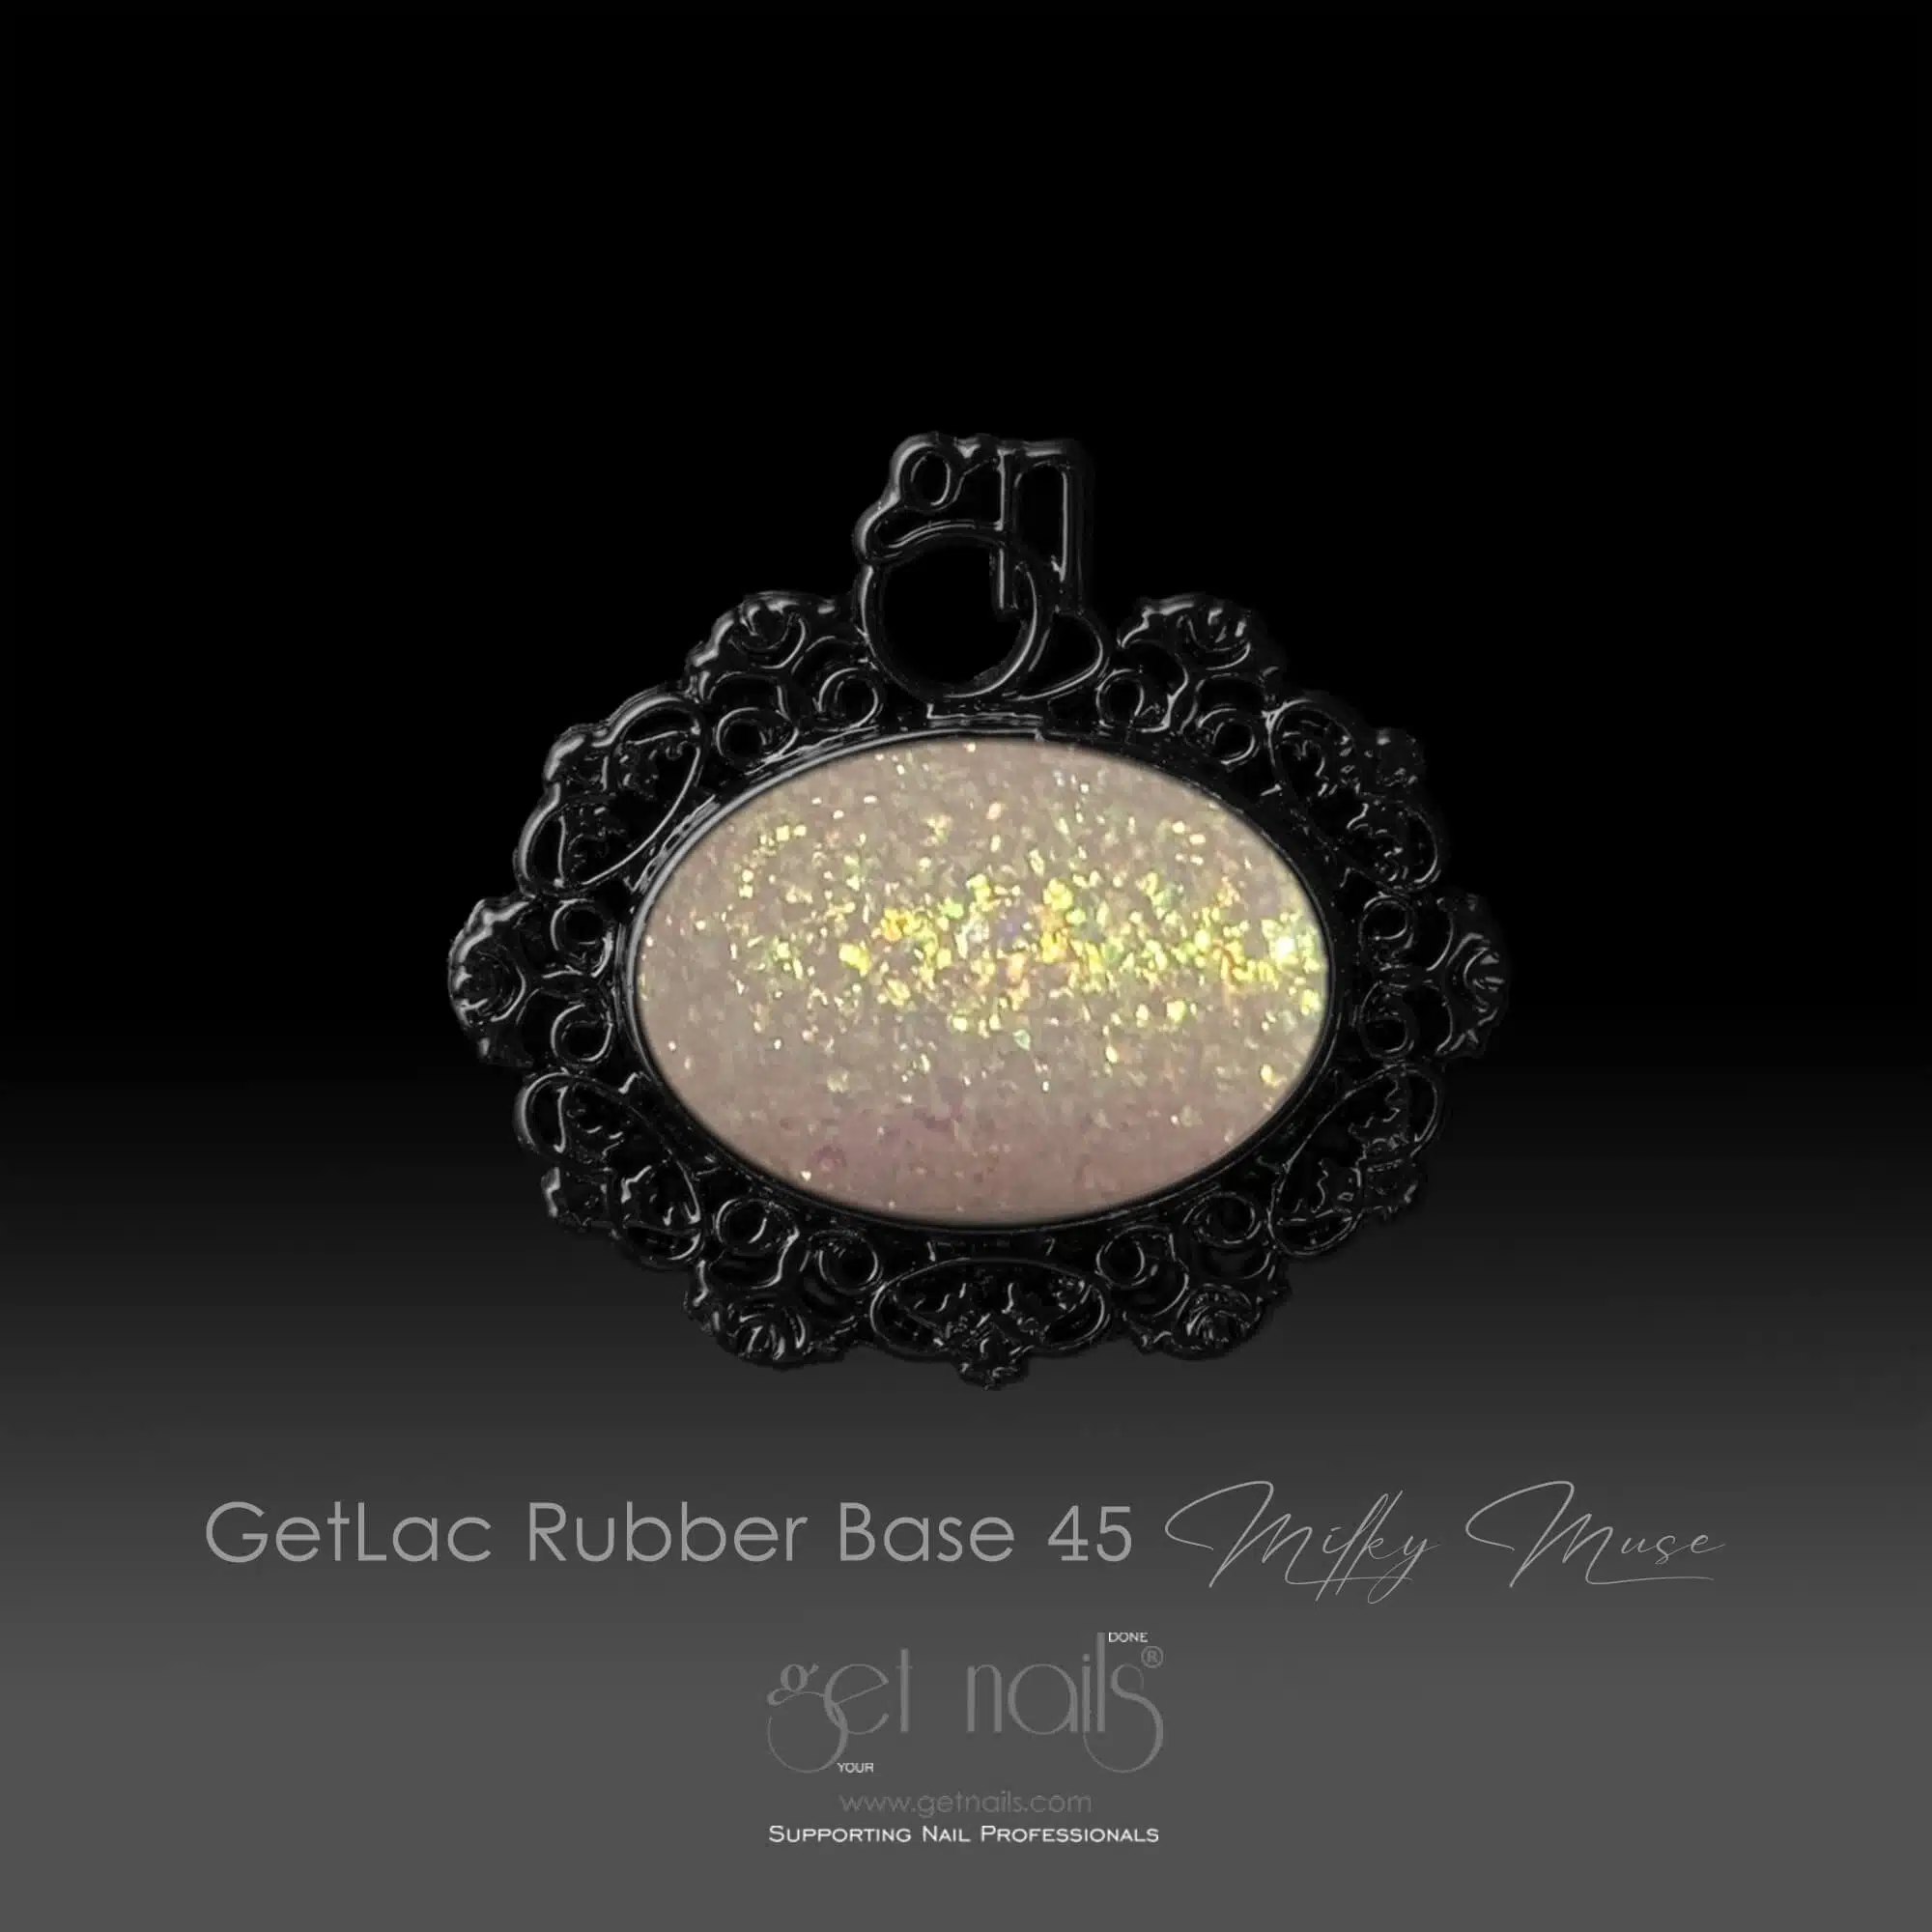 Get Nails Austria - GetLac Rubber Base 45 Milky Muse 15g